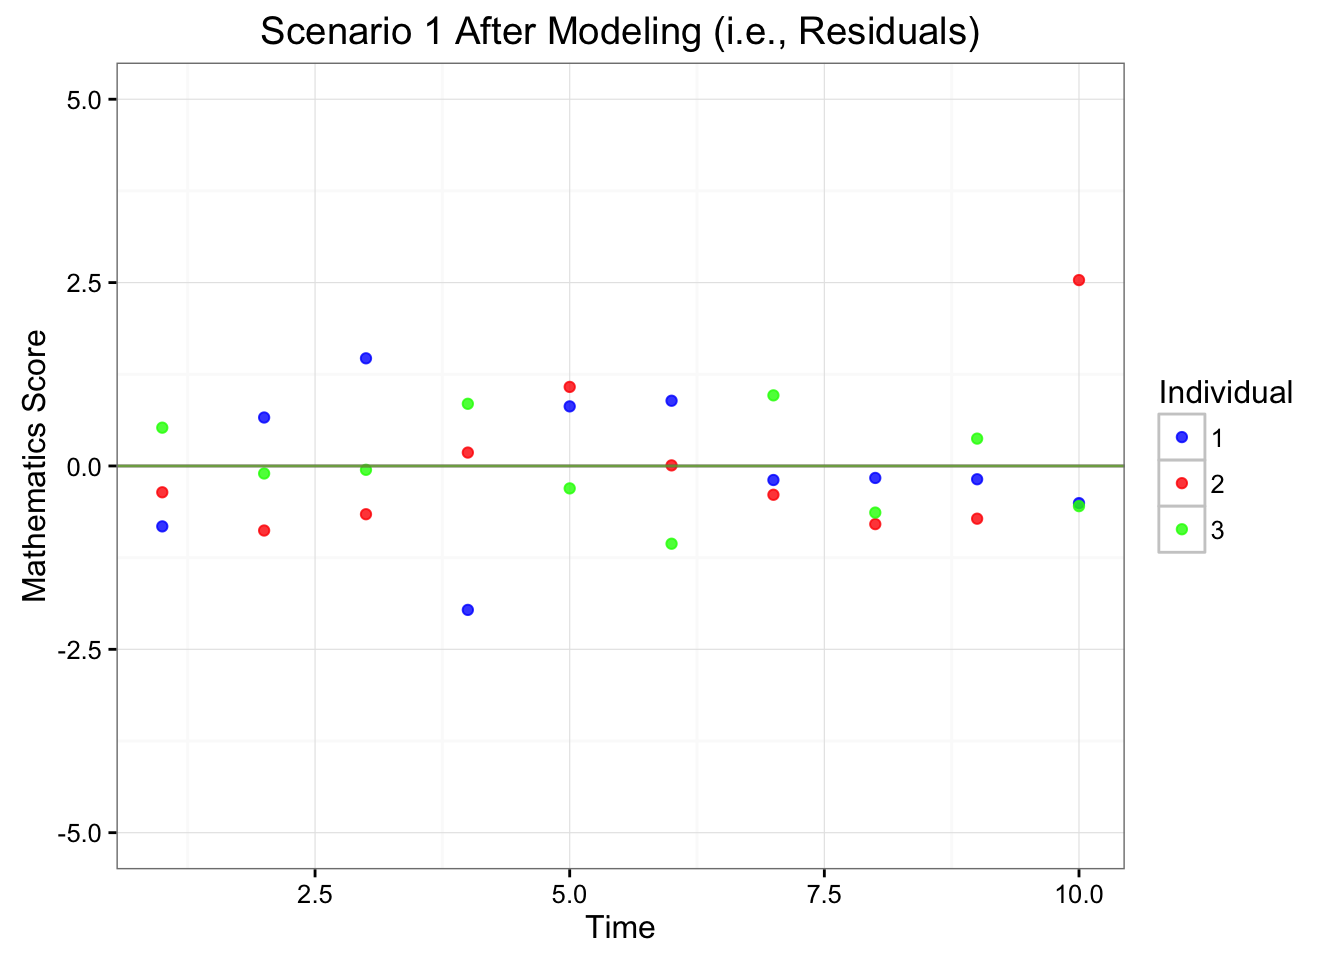 Depiction of Scenarios 1 Before and After Modeling